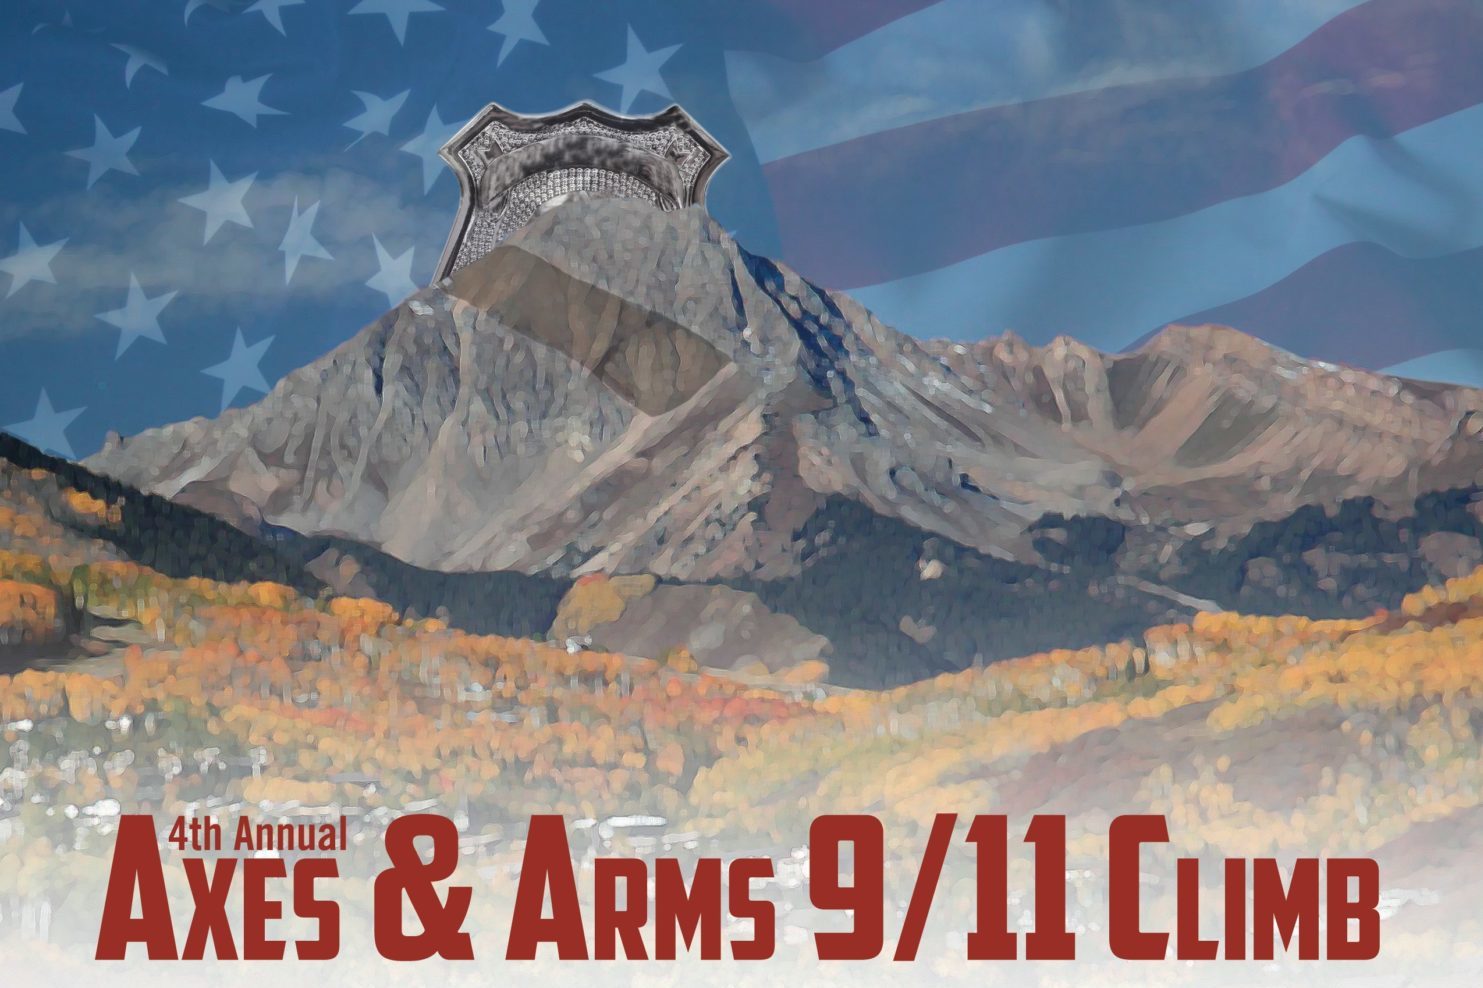 Advertisement for Axes and Arms Climb on 9/11